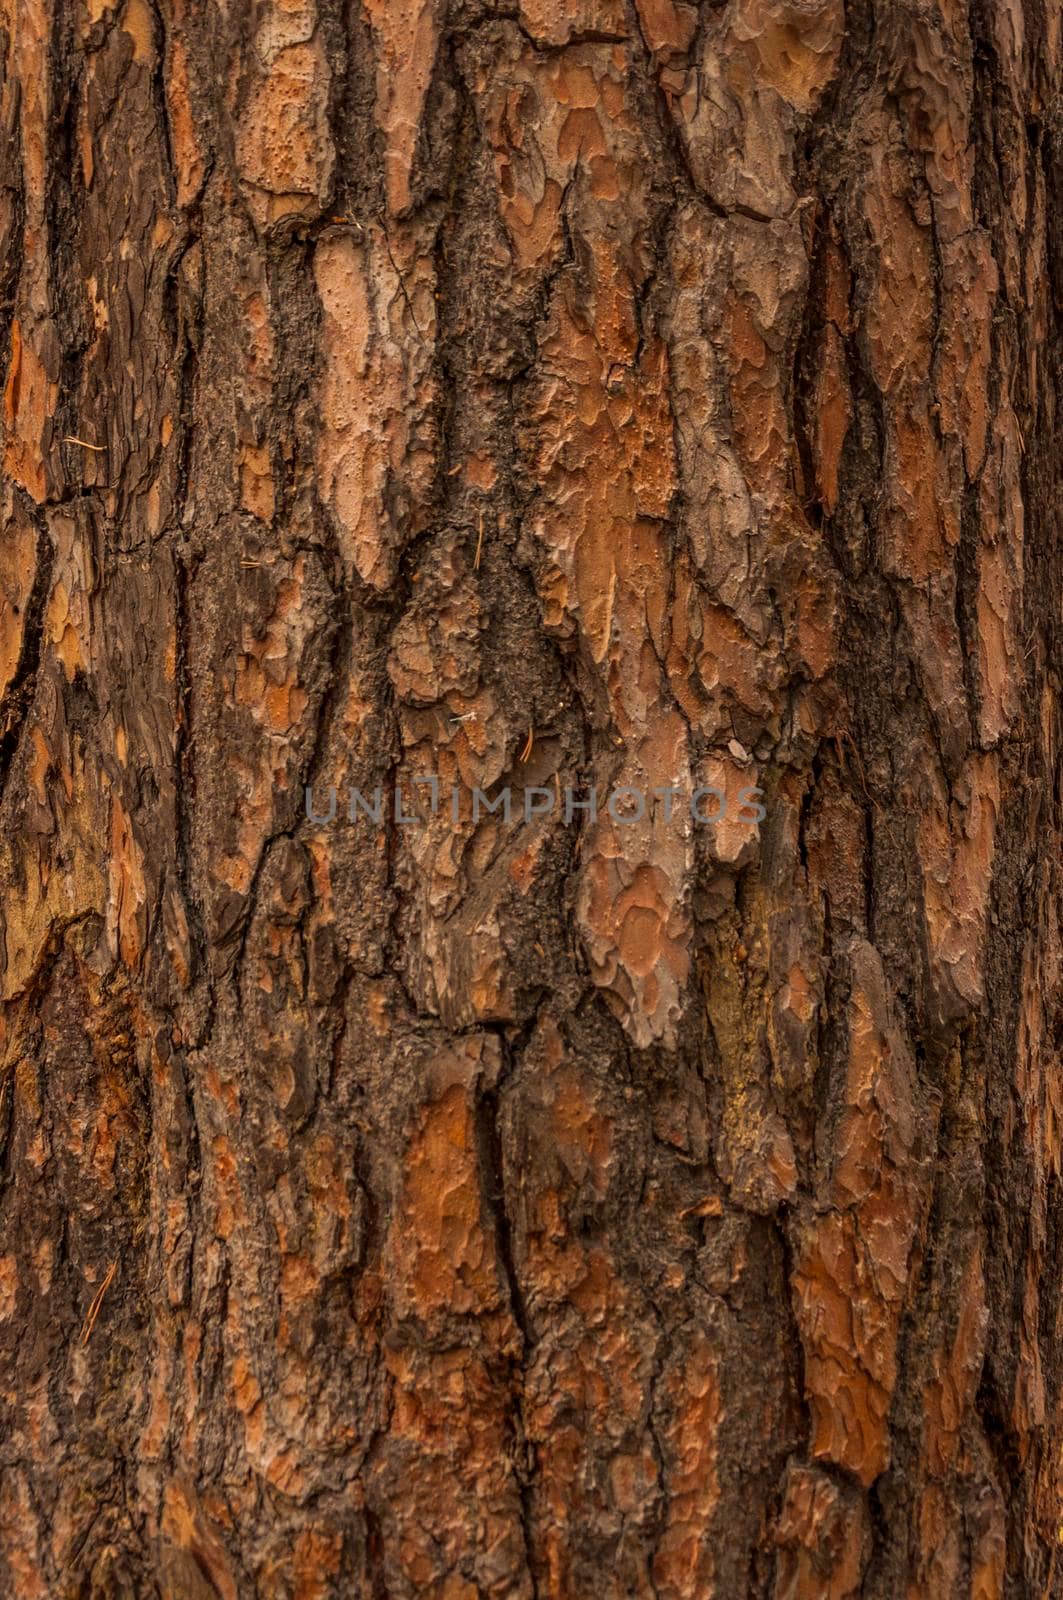 Close up of bark on tree stump. Old tree. many years old. carbon sink. close up of bark.macro photography. multi use. blog. article. background or backdrop. sunlight on bark.